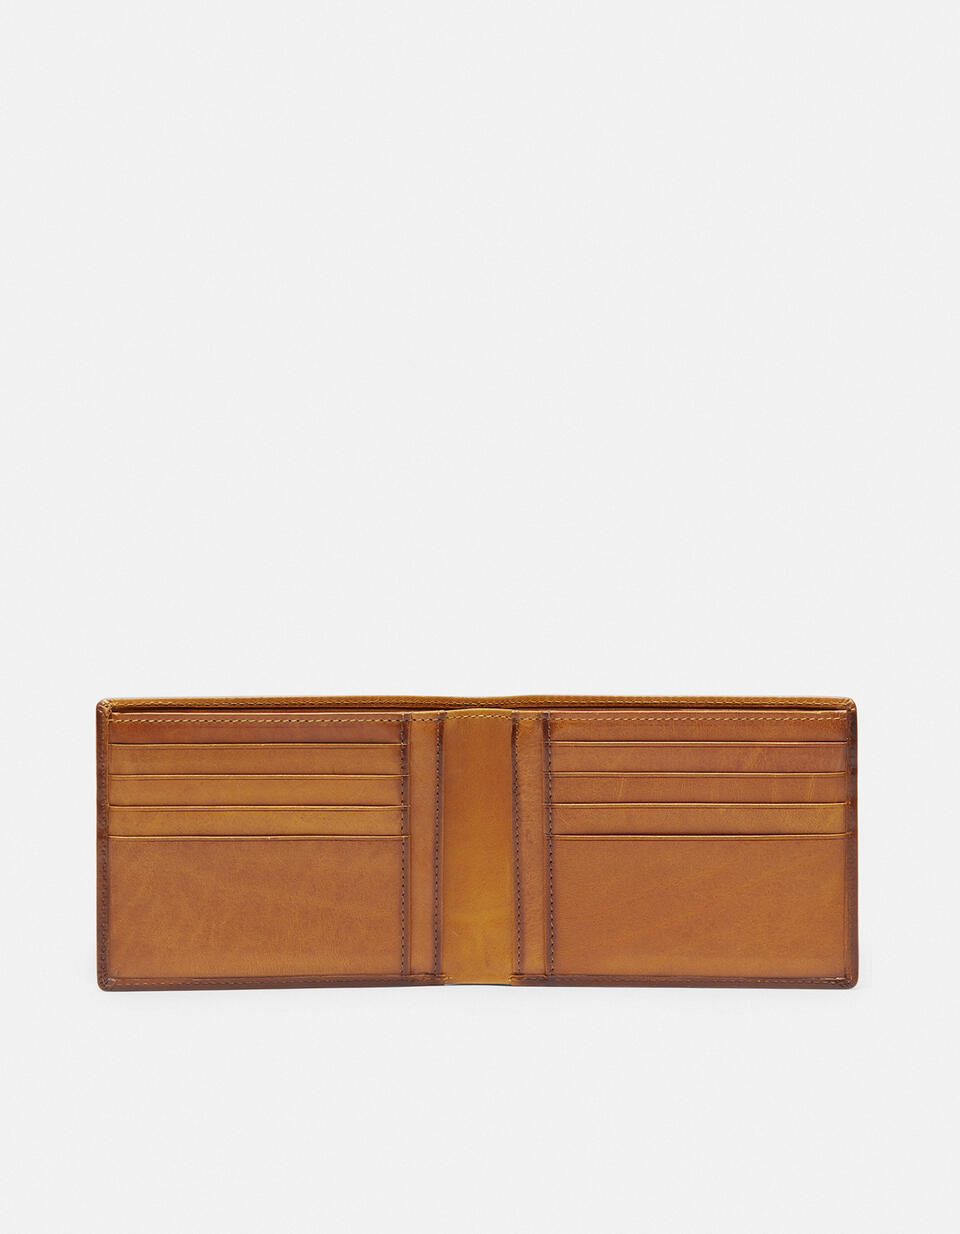 Leather Warm and Color Anti-RFid Wallet - Women's Wallets - Men's Wallets | Wallets  - Women's Wallets - Men's Wallets | WalletsCuoieria Fiorentina